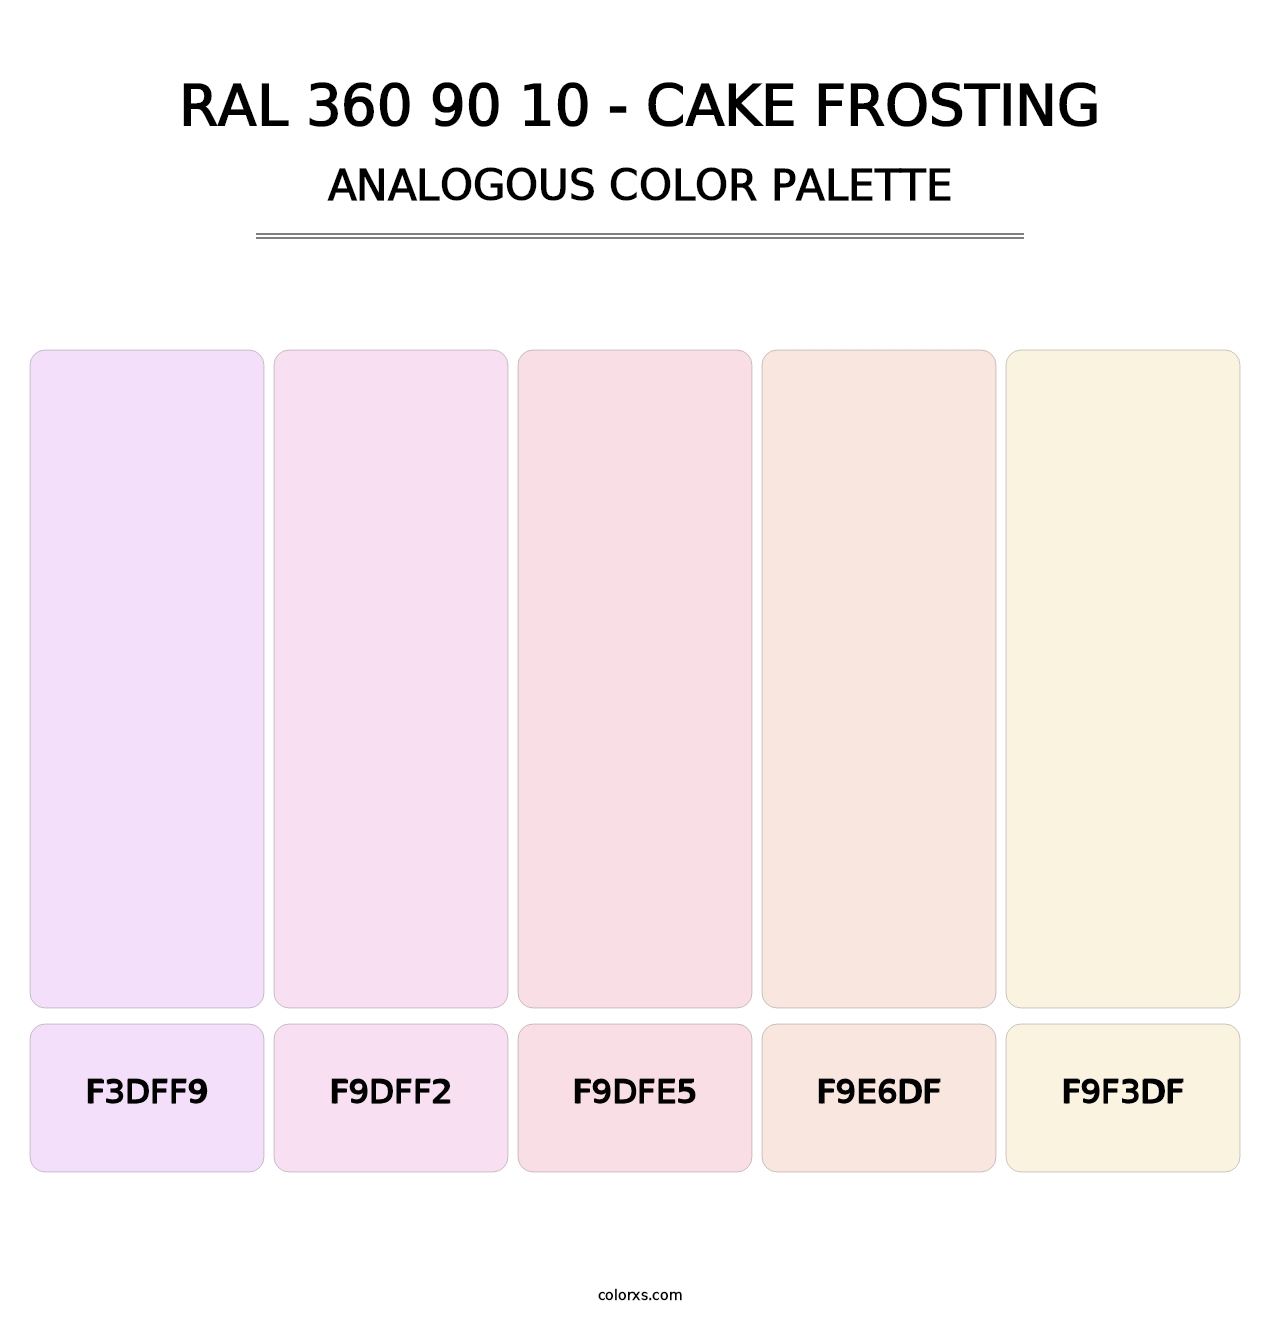 RAL 360 90 10 - Cake Frosting - Analogous Color Palette